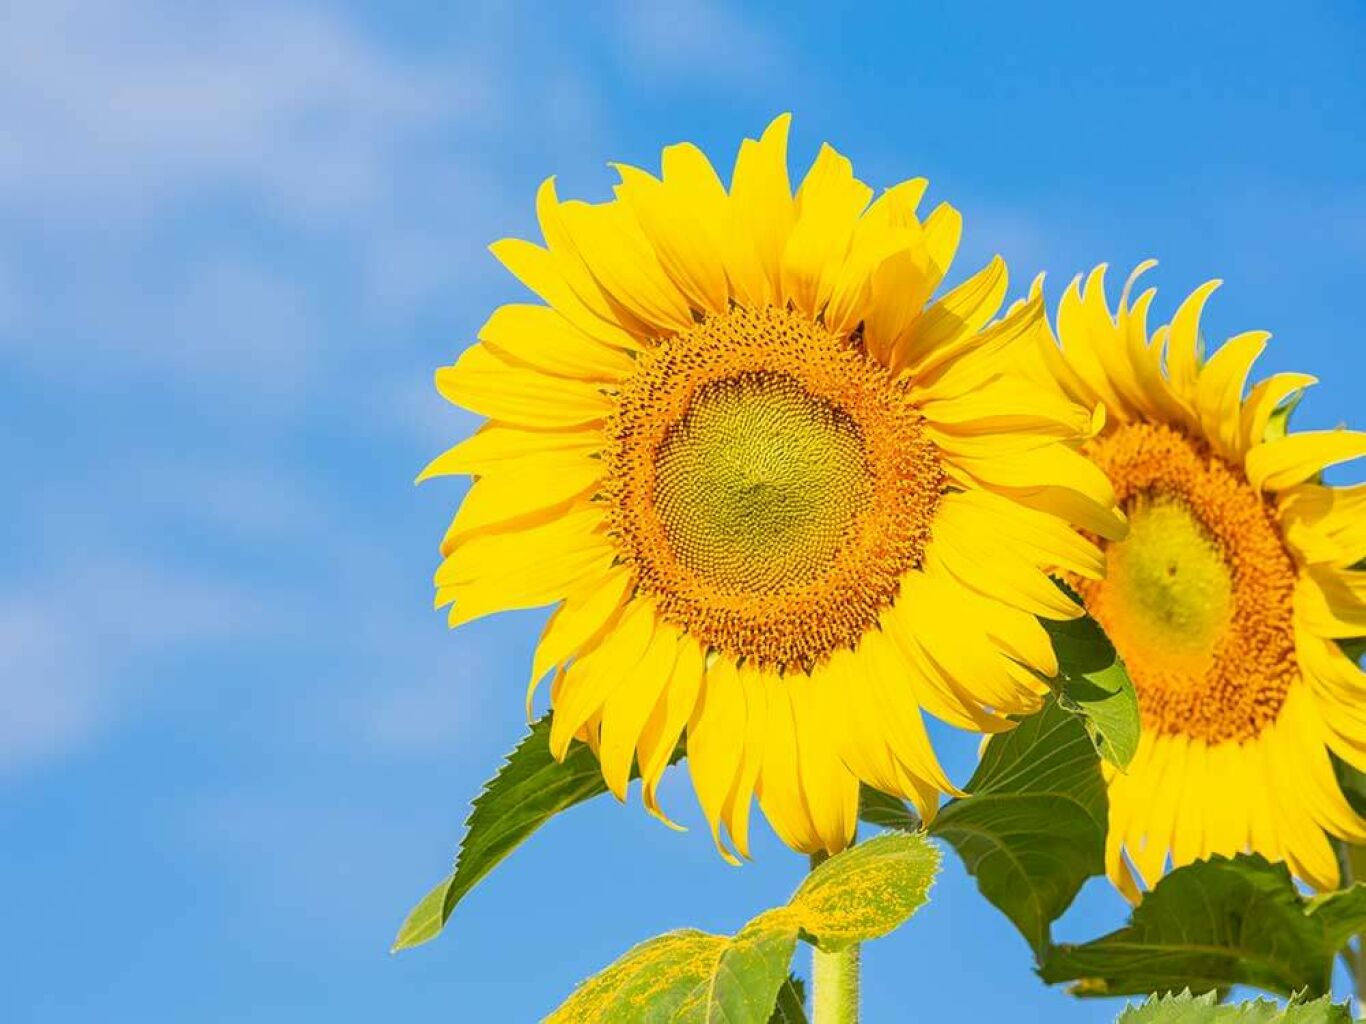 Bright yellow sunflower with bright blue sky.